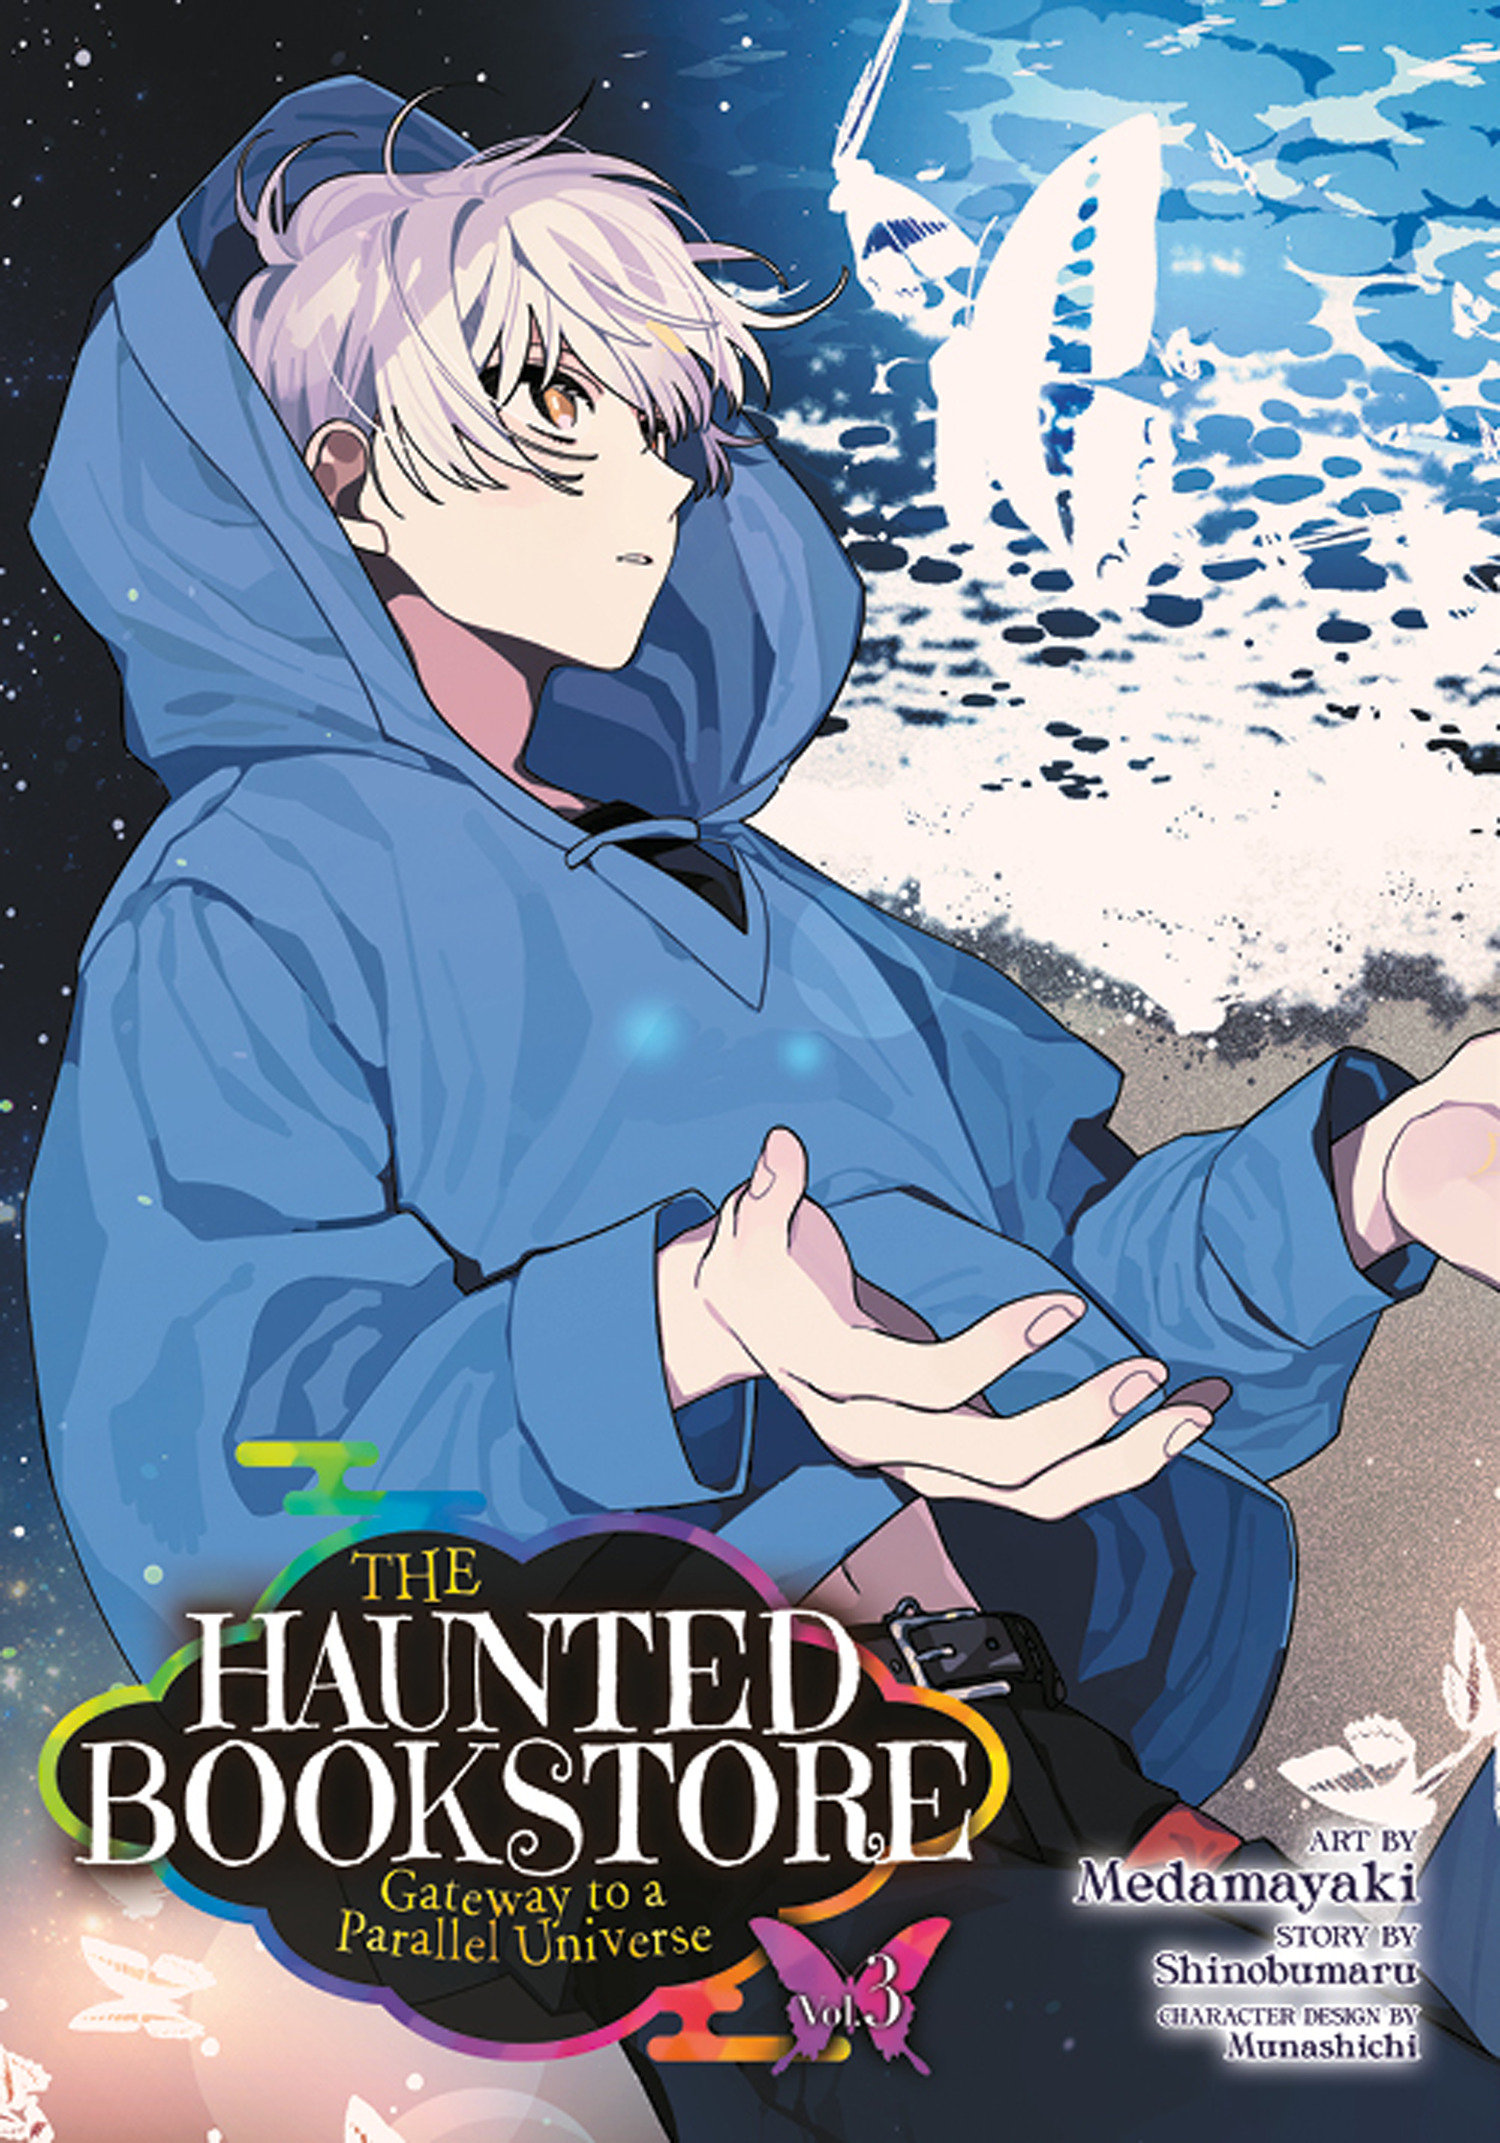 The Haunted Bookstore Gateway to a Parallel Universe Manga Volume 3